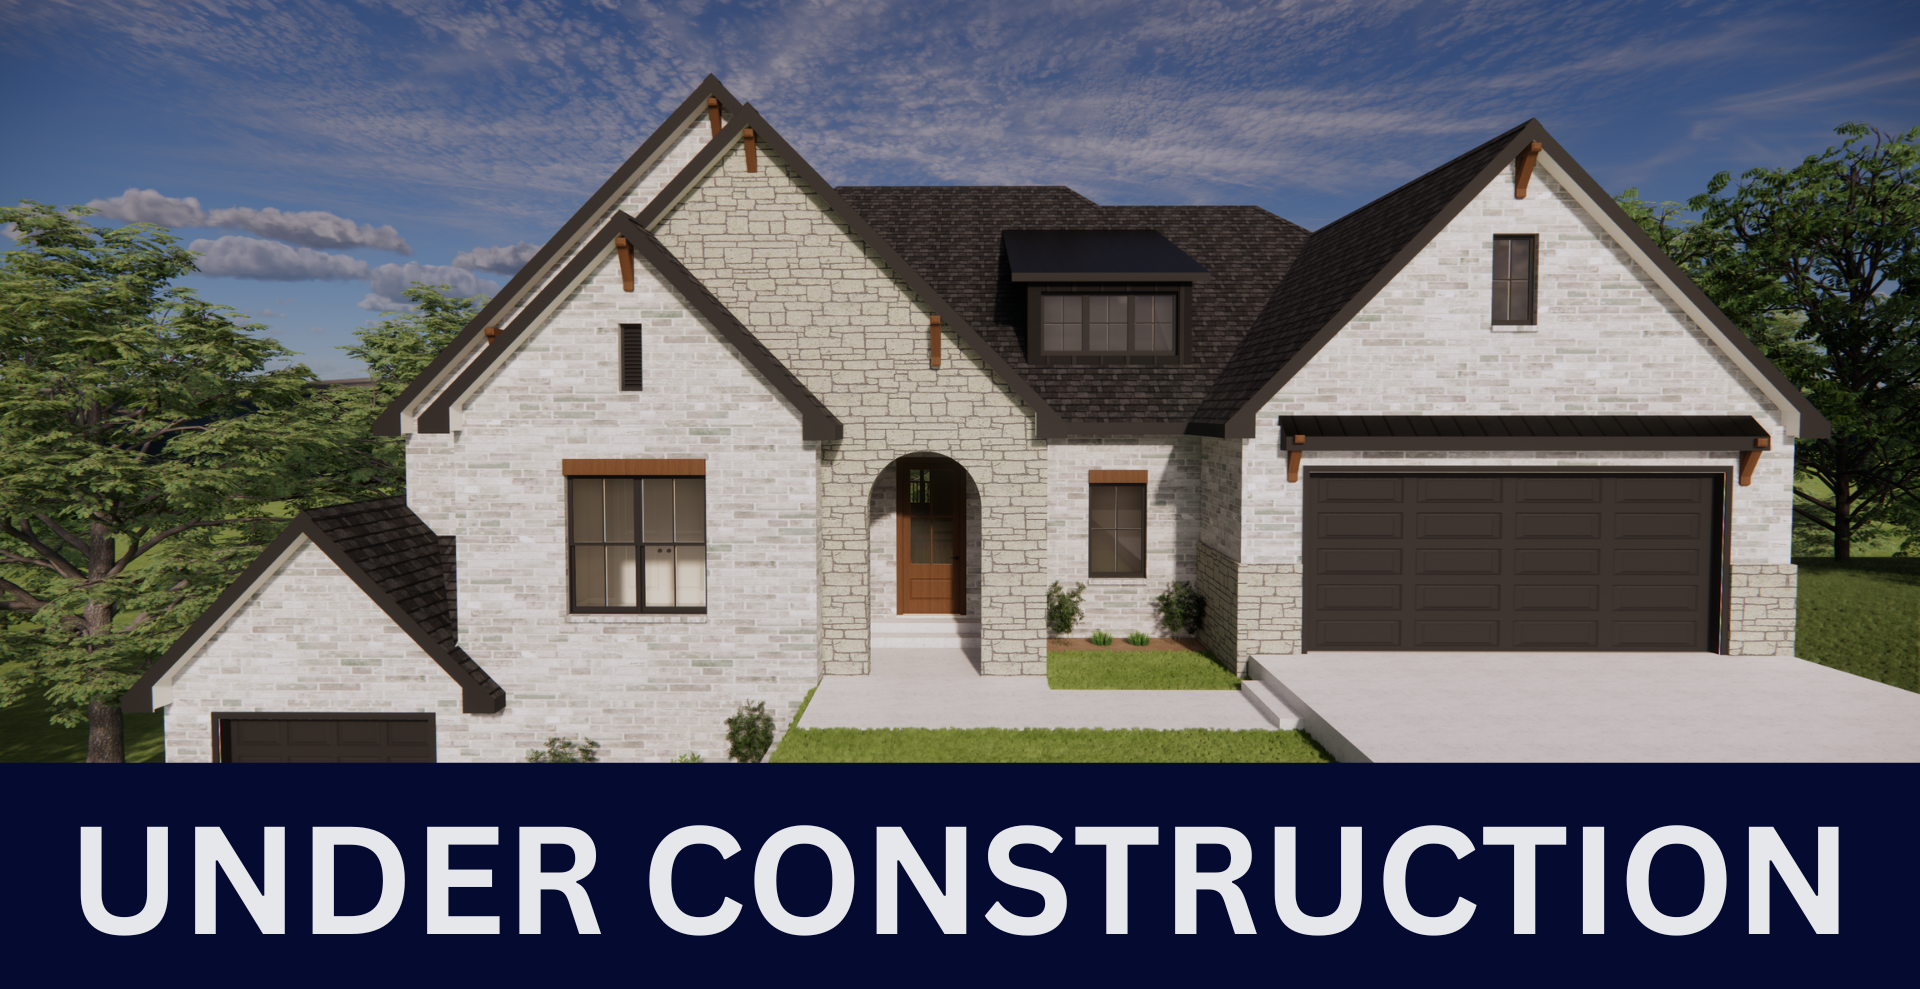 new construction home with brick and stone exterior and third car garage on a lower deck hines homes